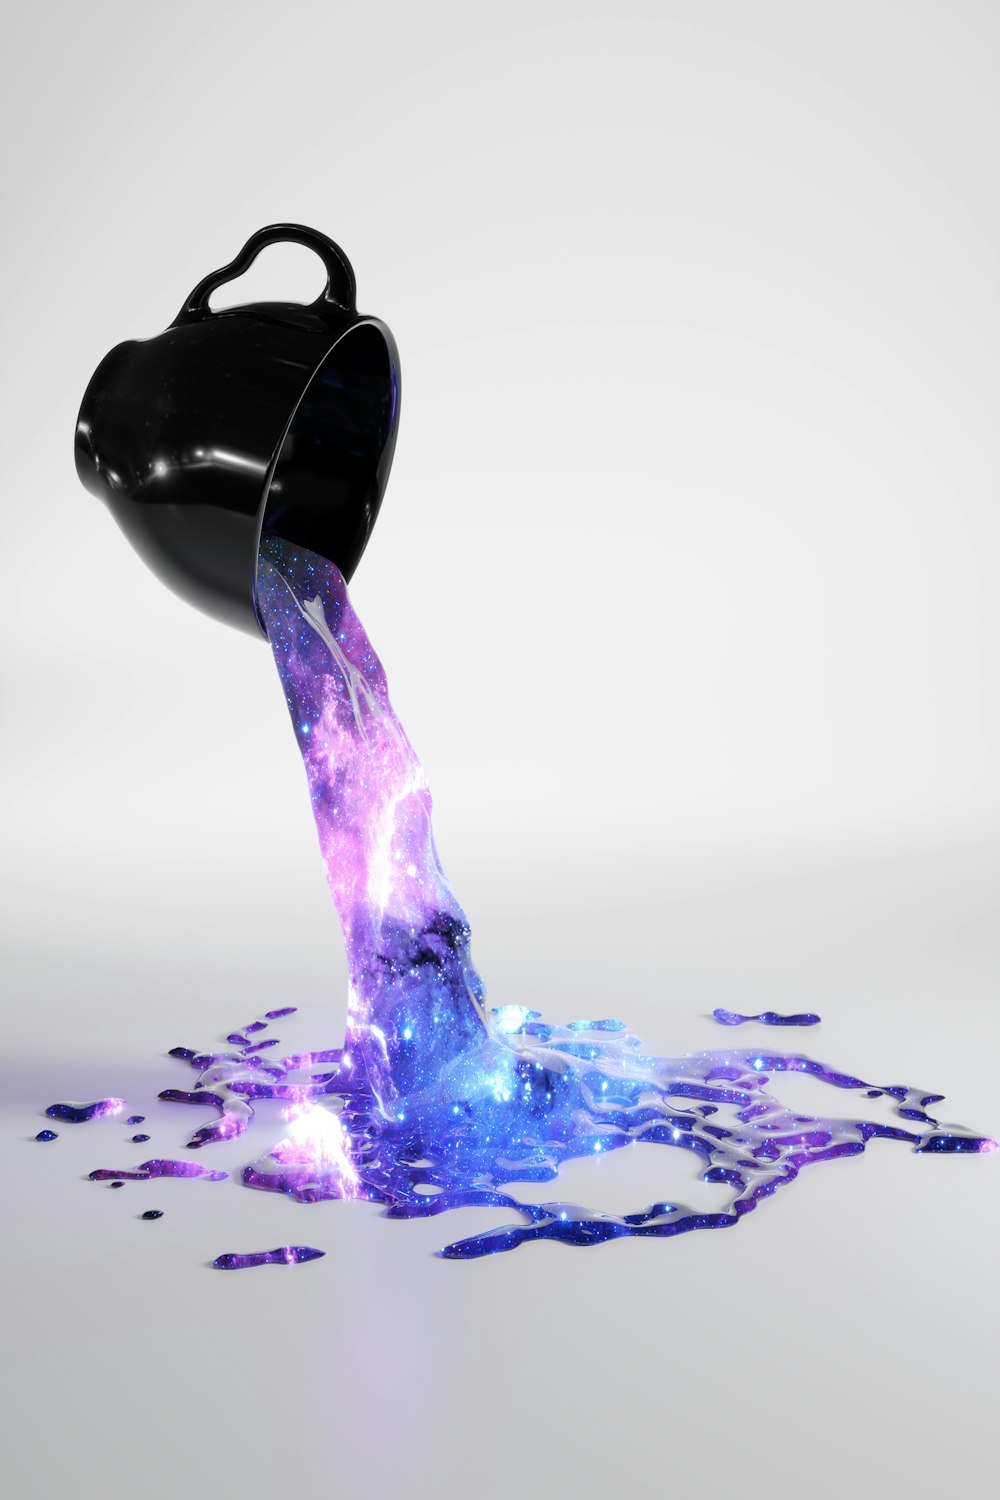 a purple and blue liquid pouring out of a black container